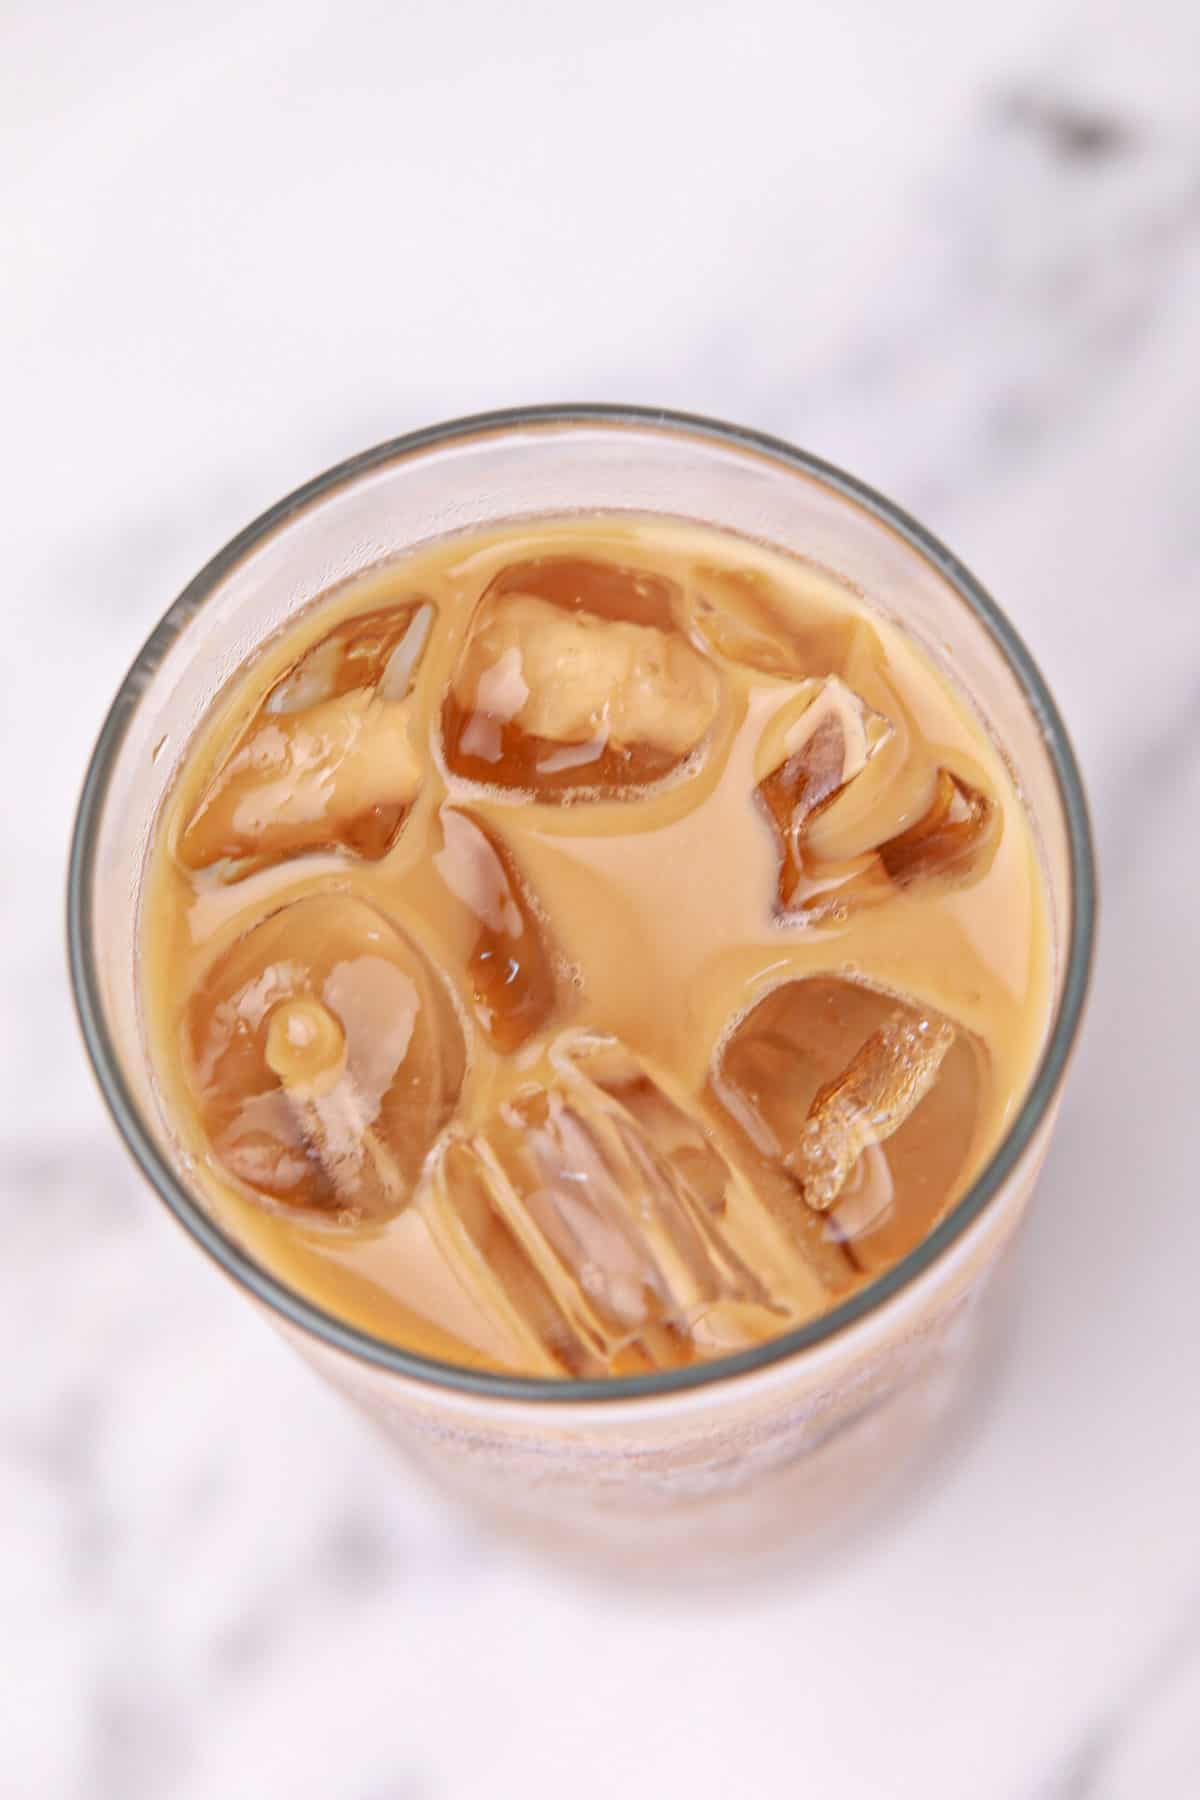 homemade iced coffee in a cup